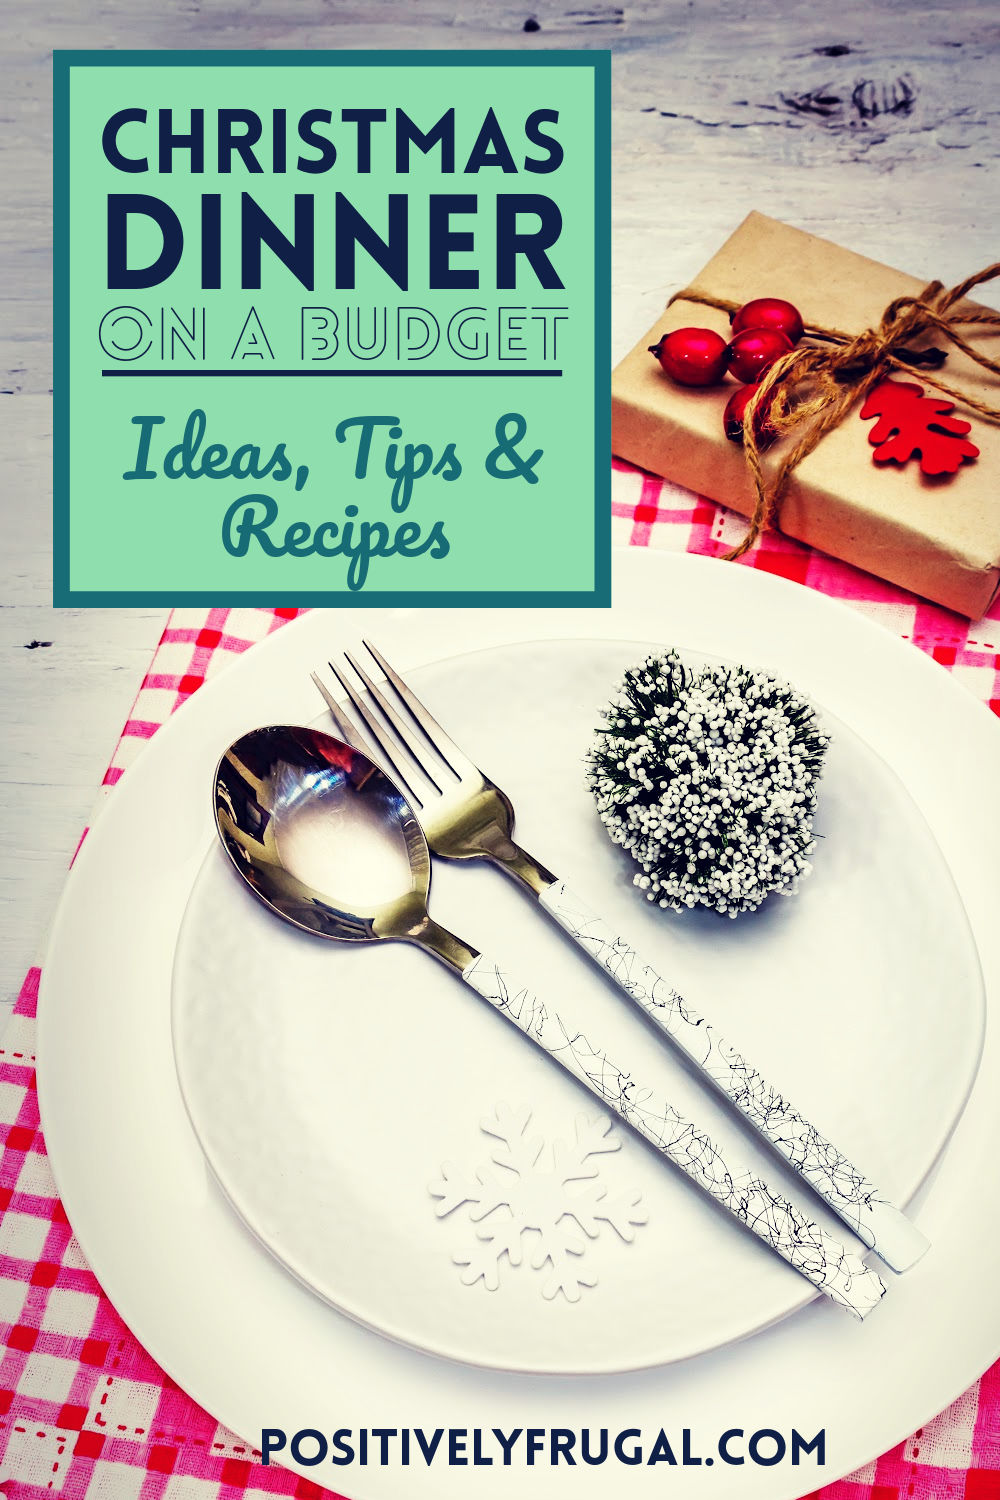 Christmas Dinner on a Budget Plus Recipes by PositivelyFrugal.com